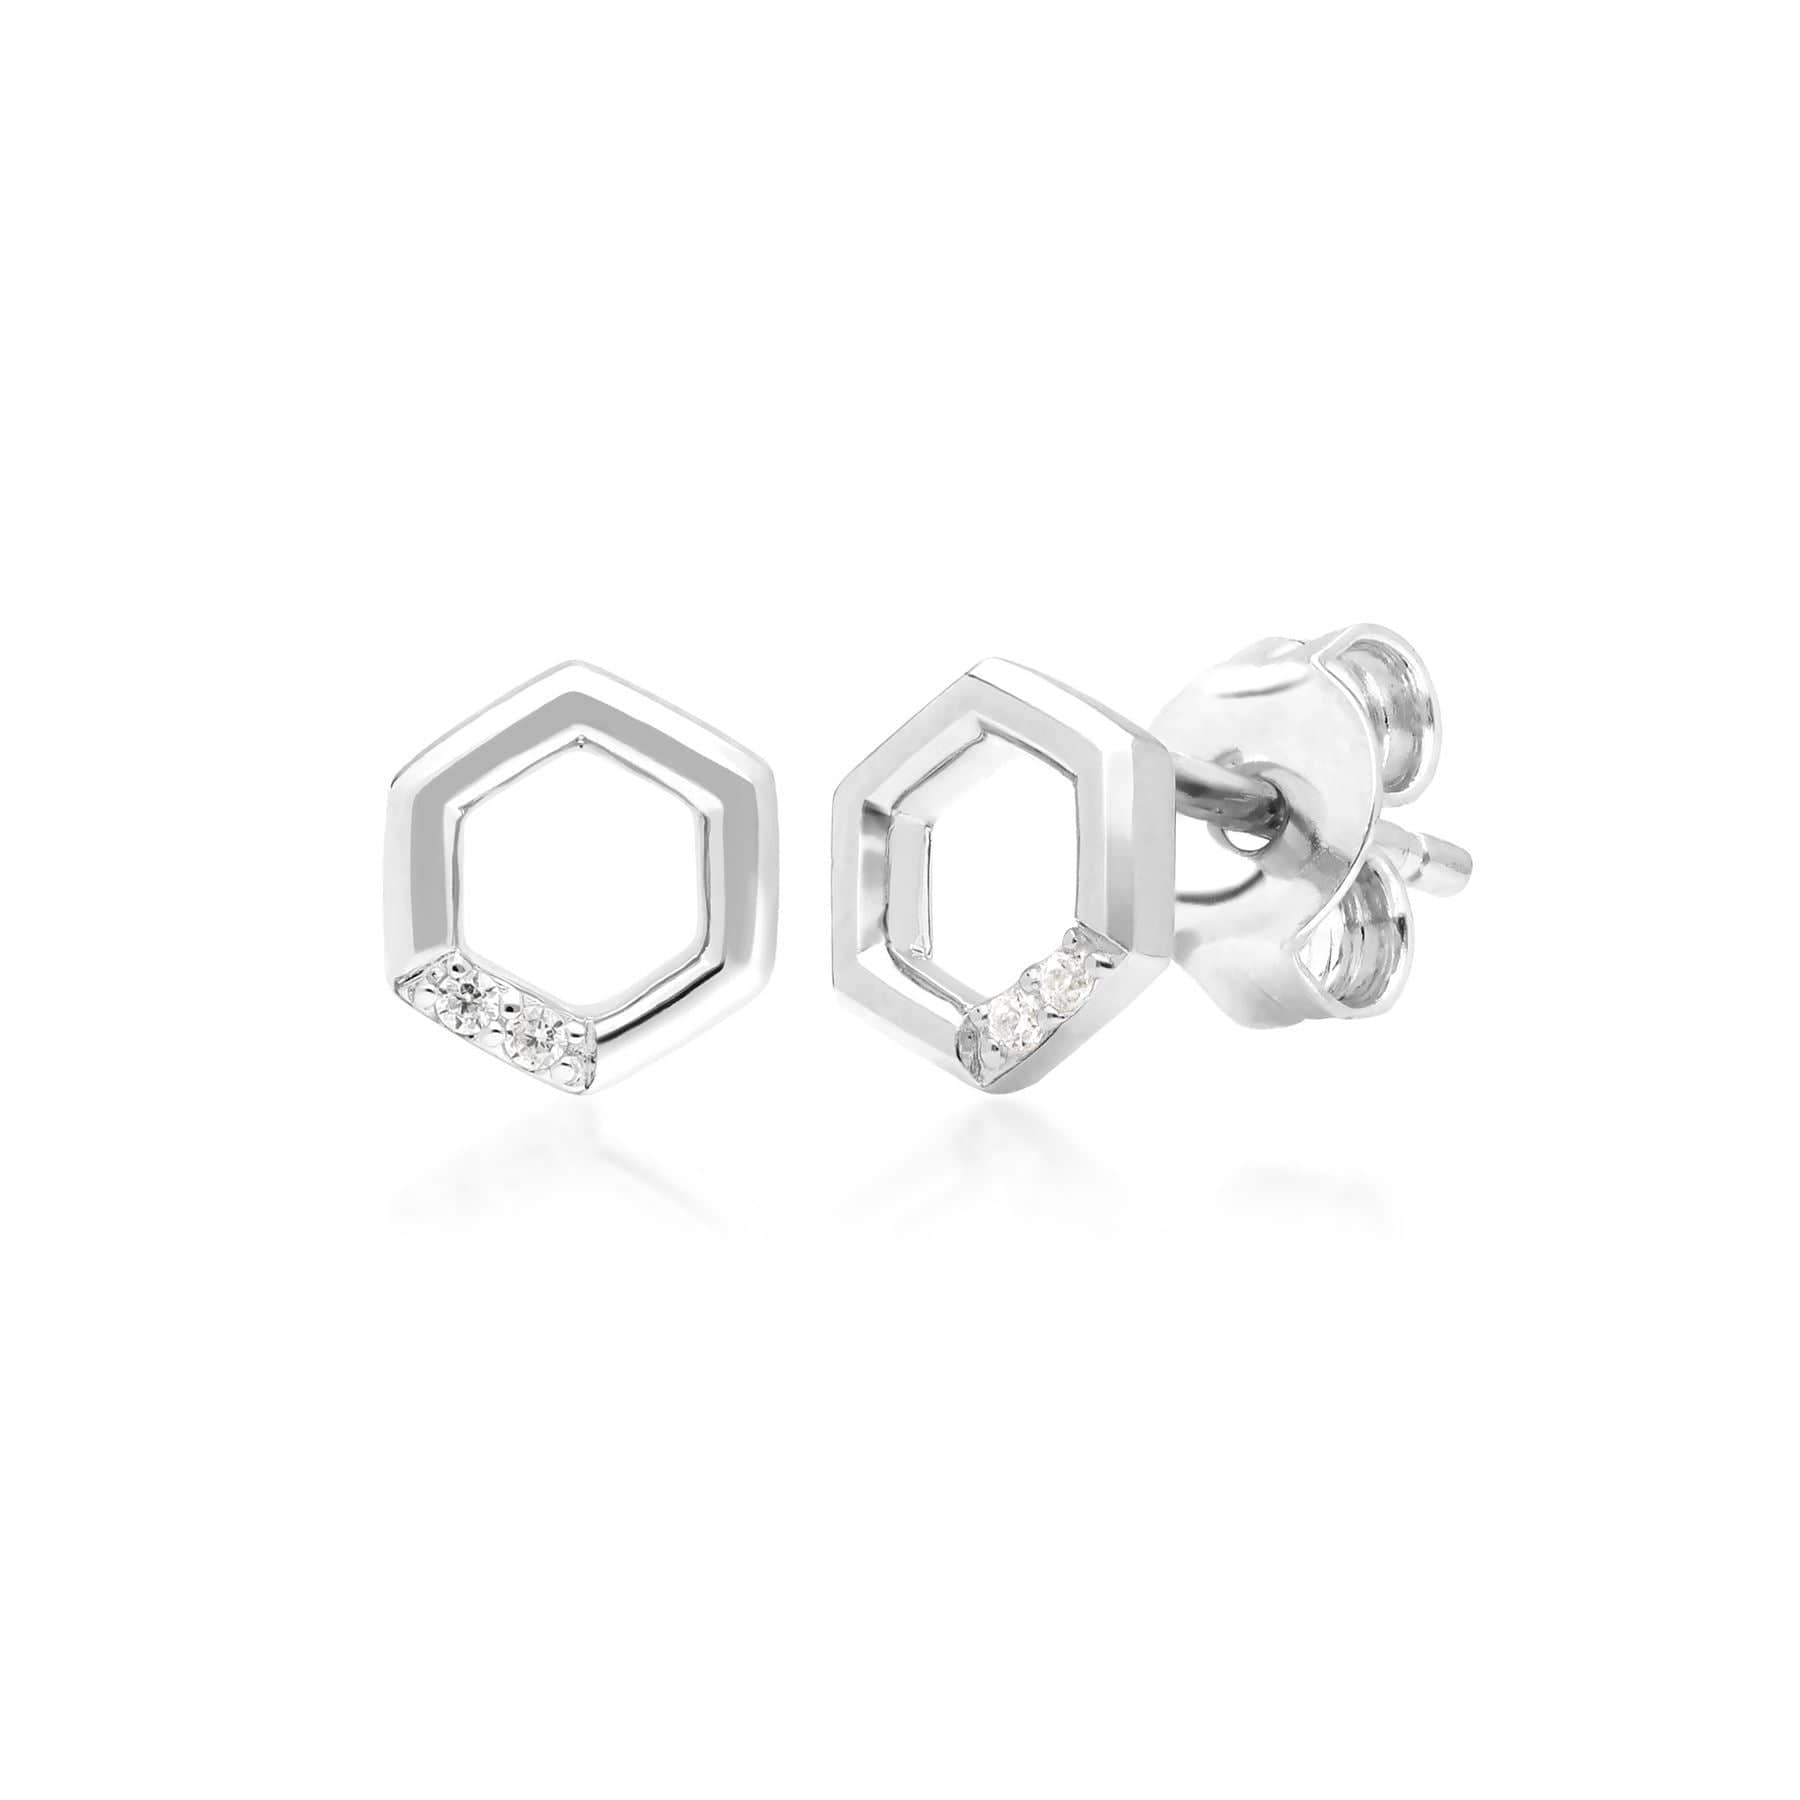 162E0270019-162R0392019 Diamond Pave Hexagon Stud Earring & Ring Set in 9ct White Gold 2